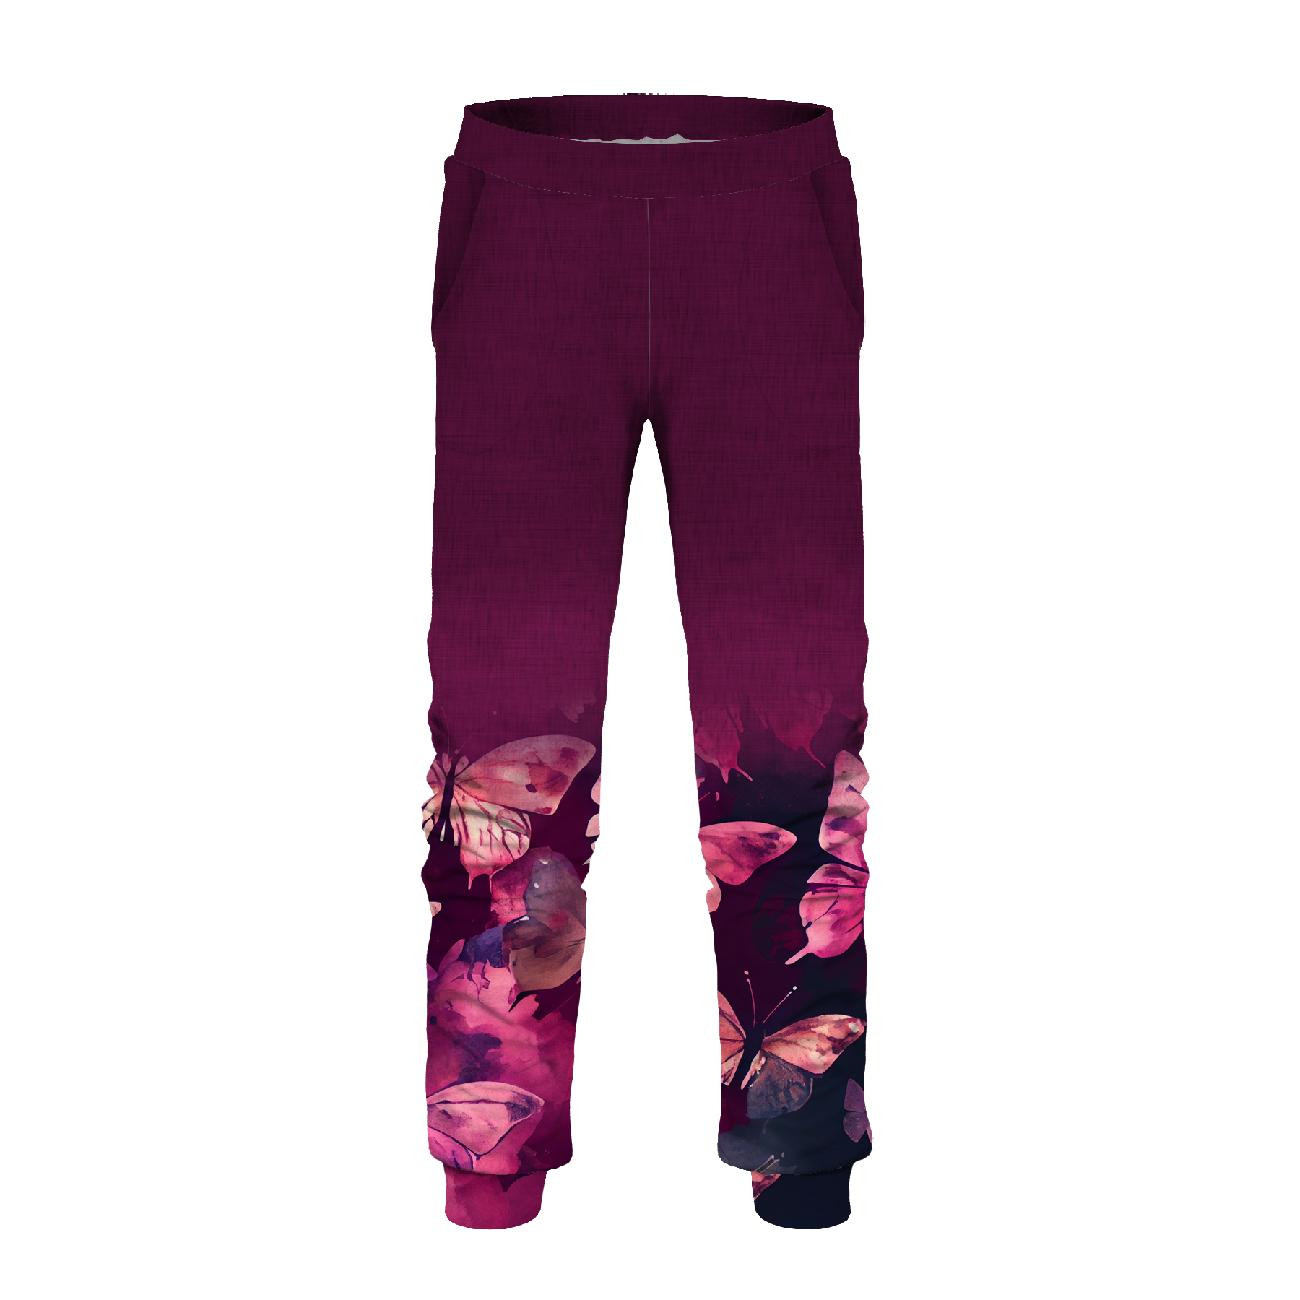 Children's tracksuit (MILAN) - BUTTERFLY PAT. 1 - sewing set